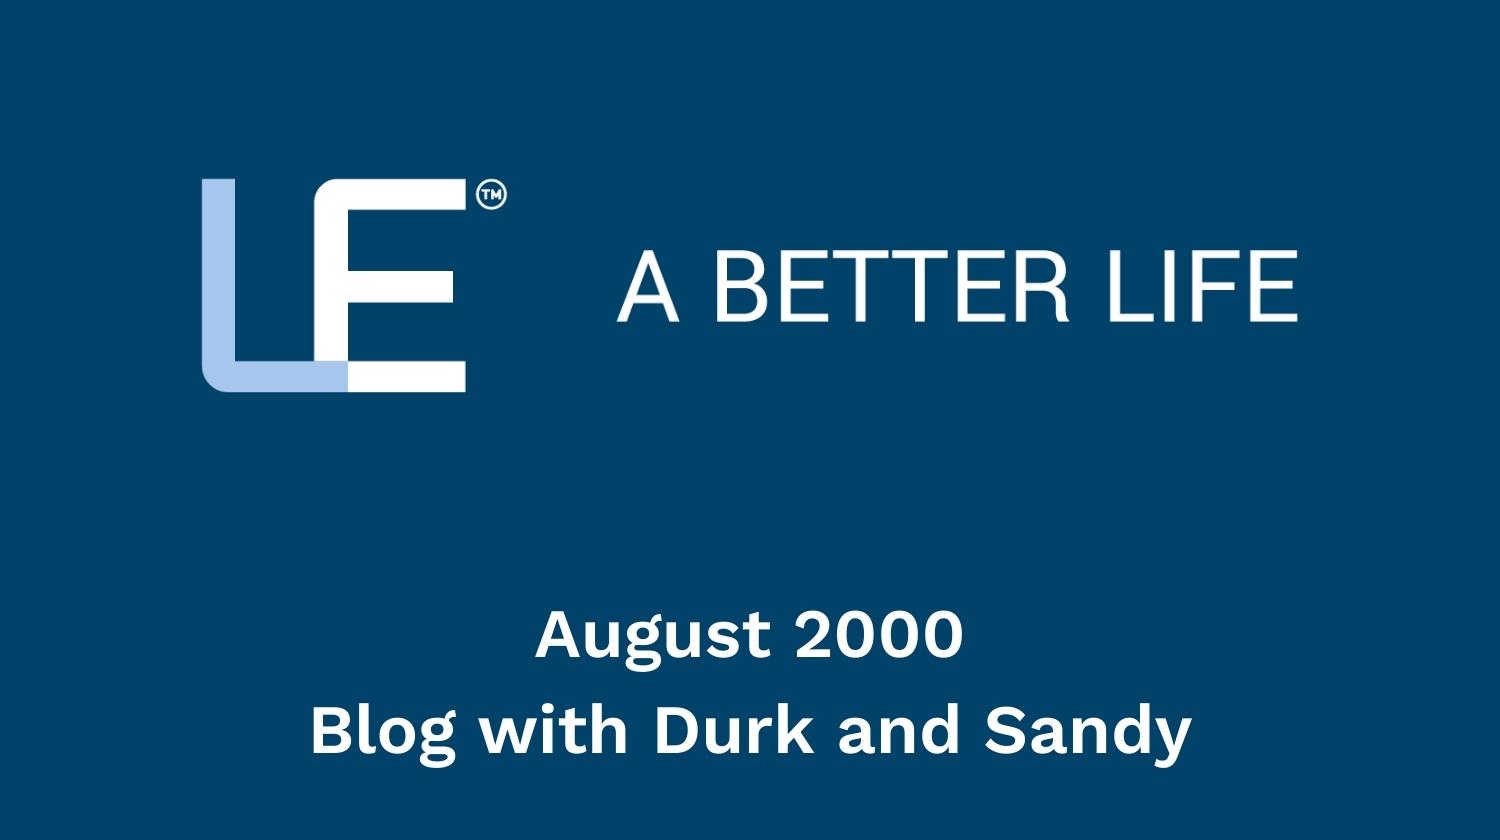 August 2000 Blog with Durk and Sandy